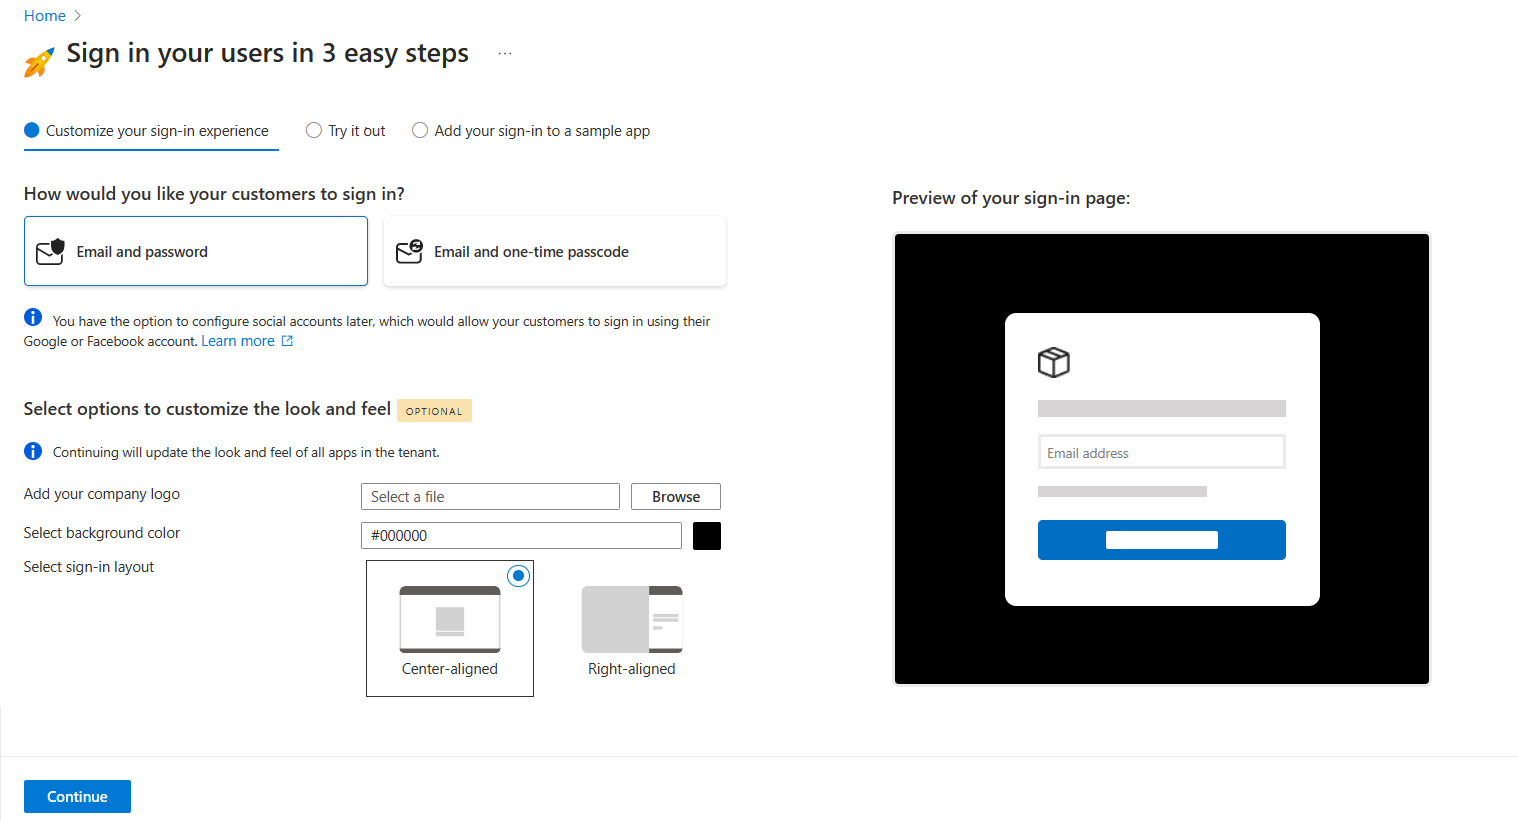 Screenshot of customizing the sign-in experience in the guide.